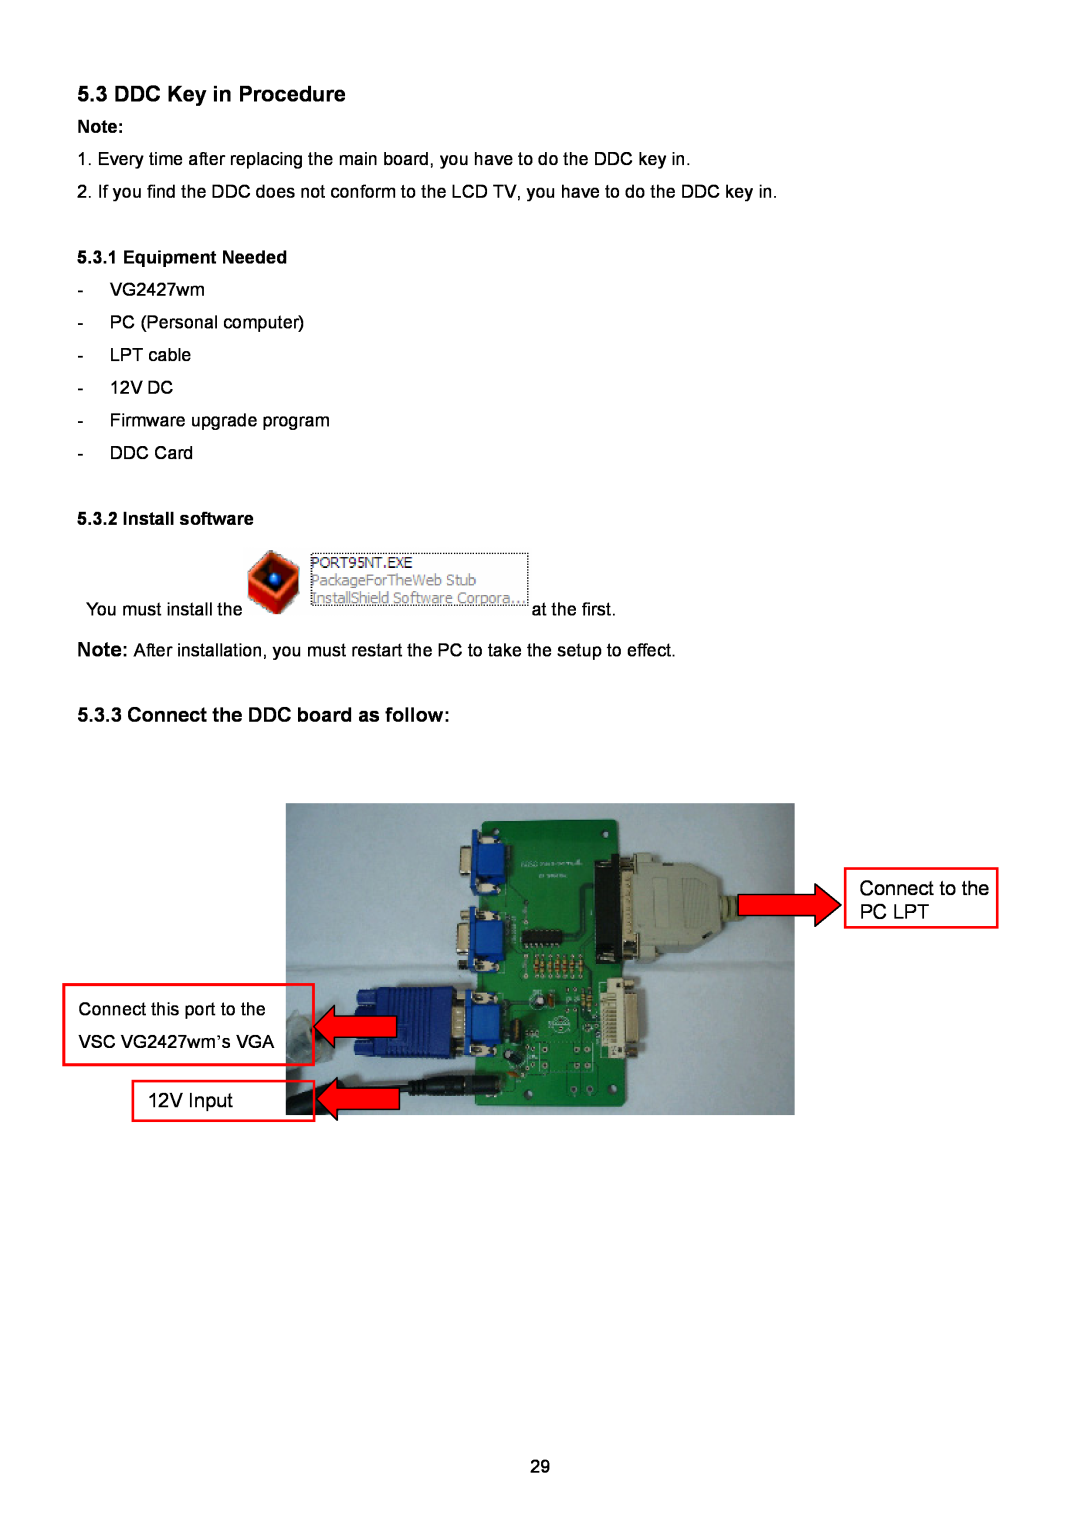 ViewSonic VSXXXXX service manual DDC Key in Procedure, Connect the DDC board as follow, Connect to the PC LPT, 12V Input 